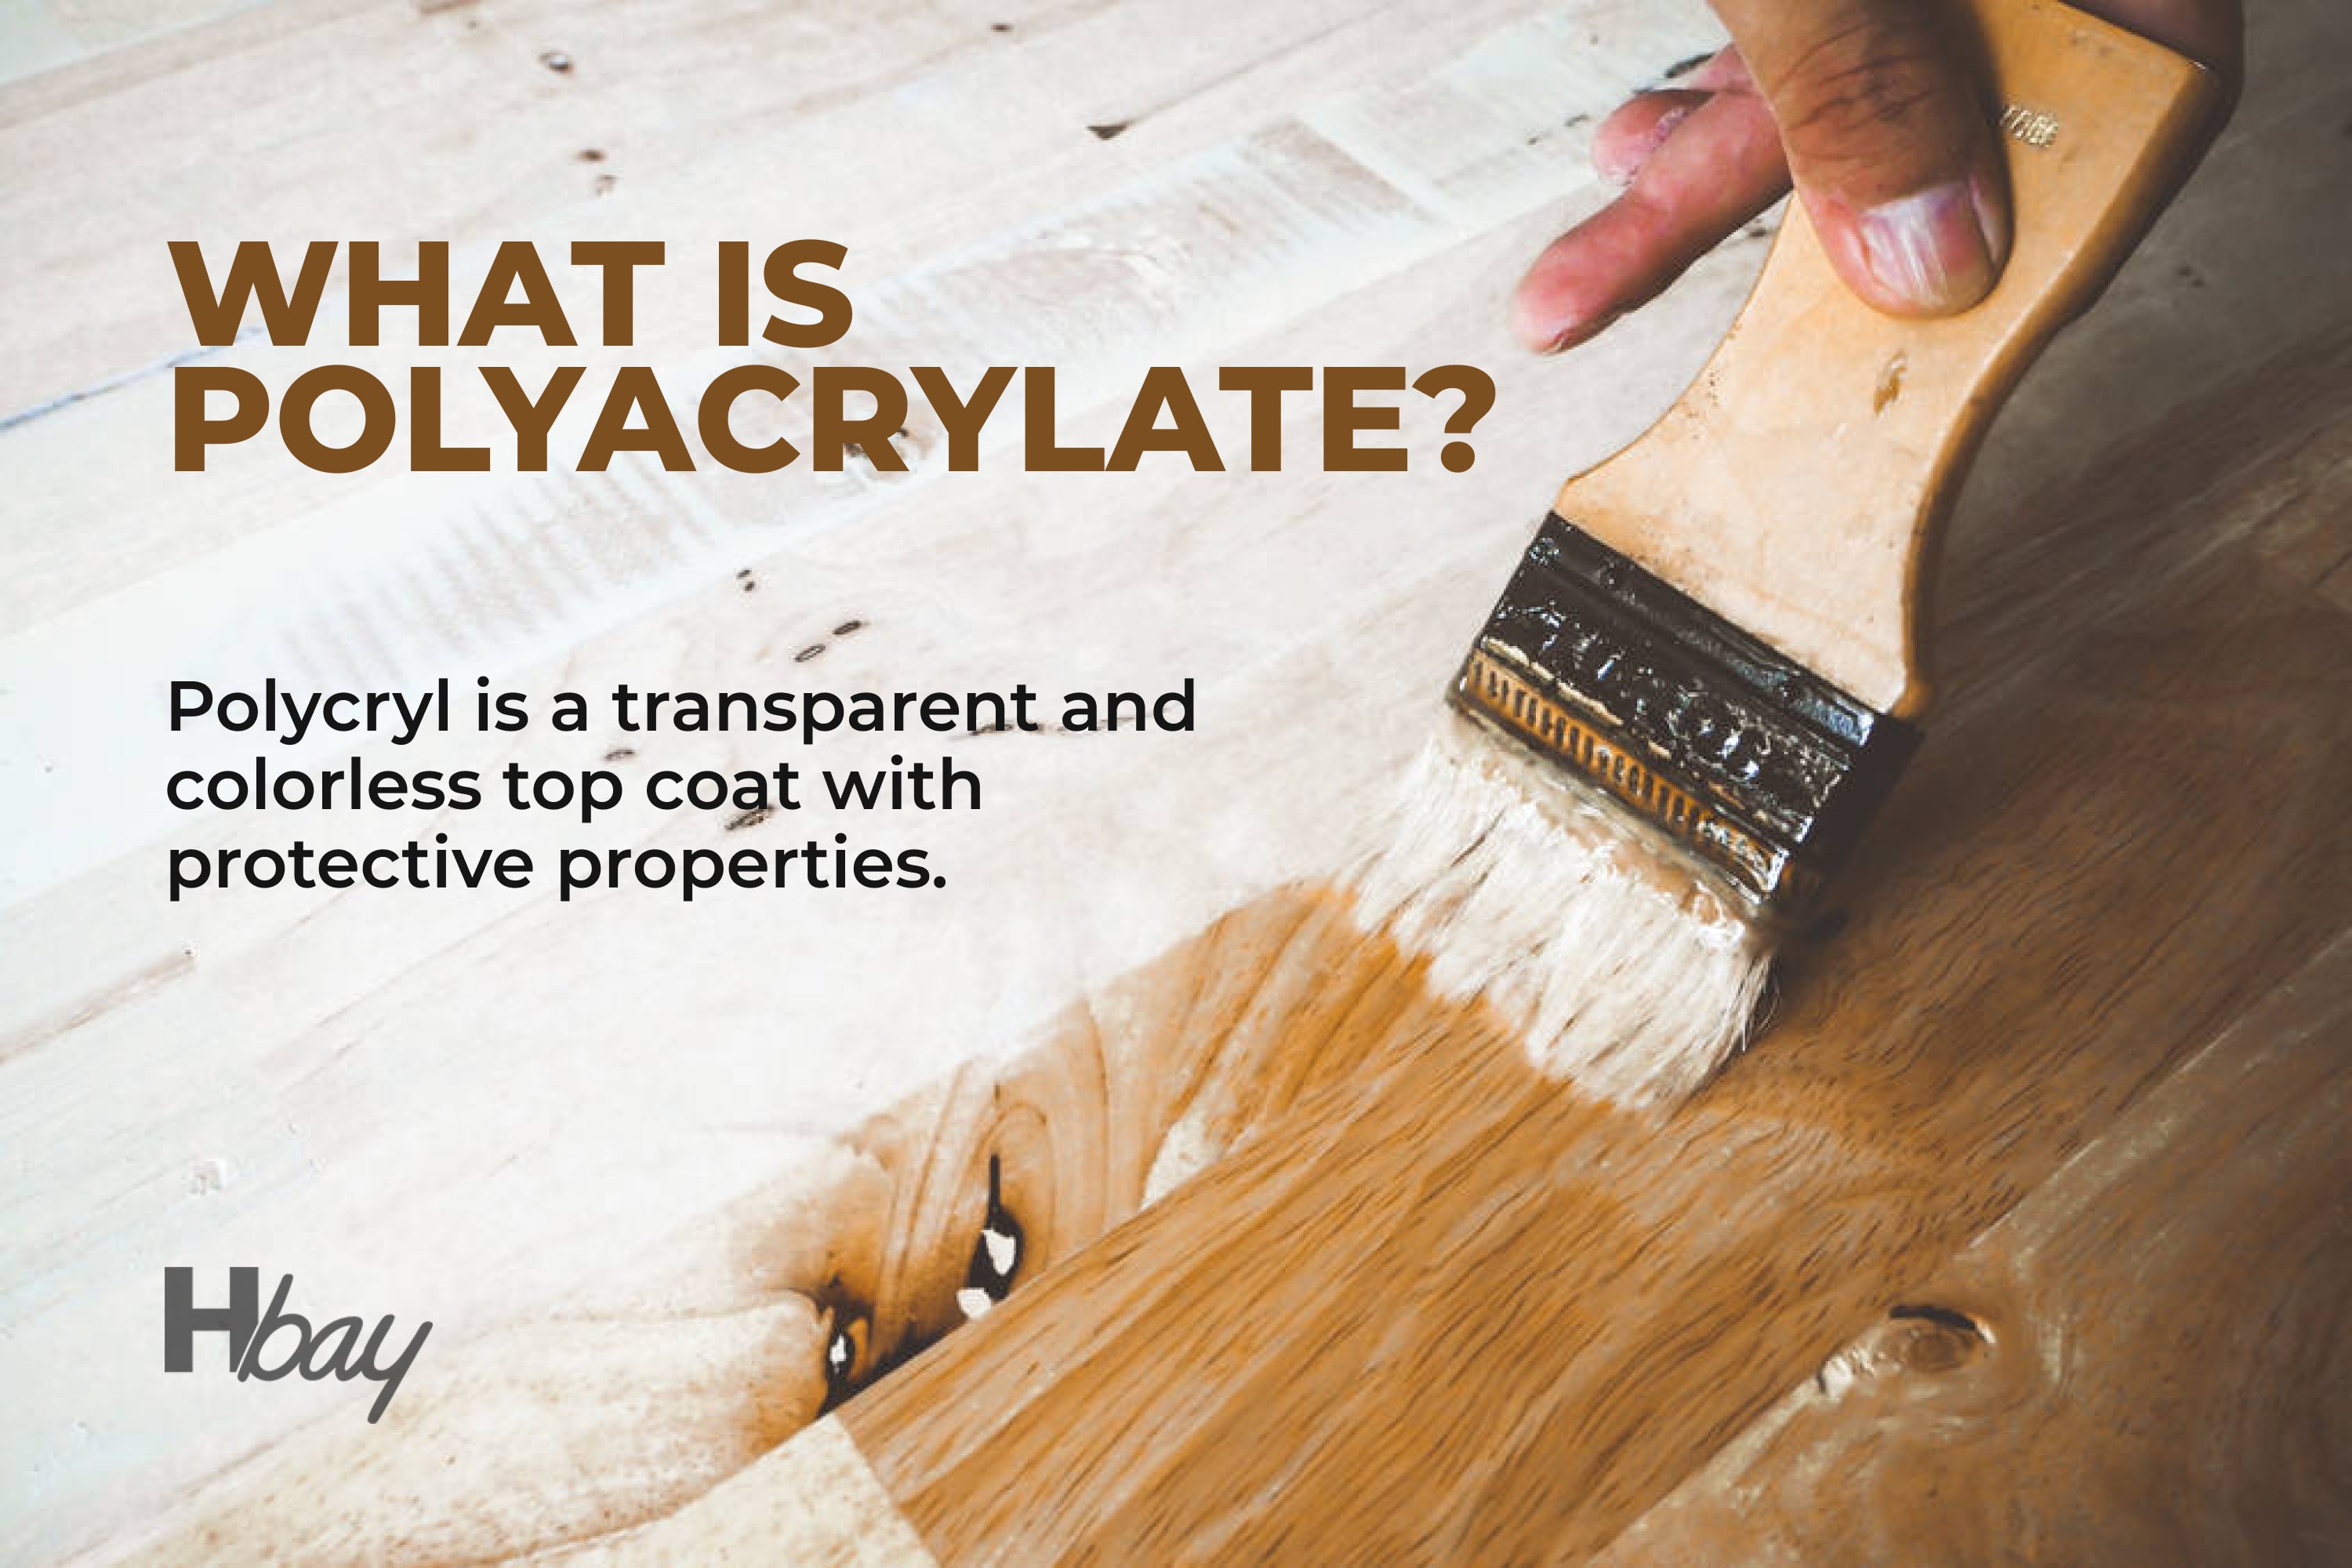 What is polyacrylate